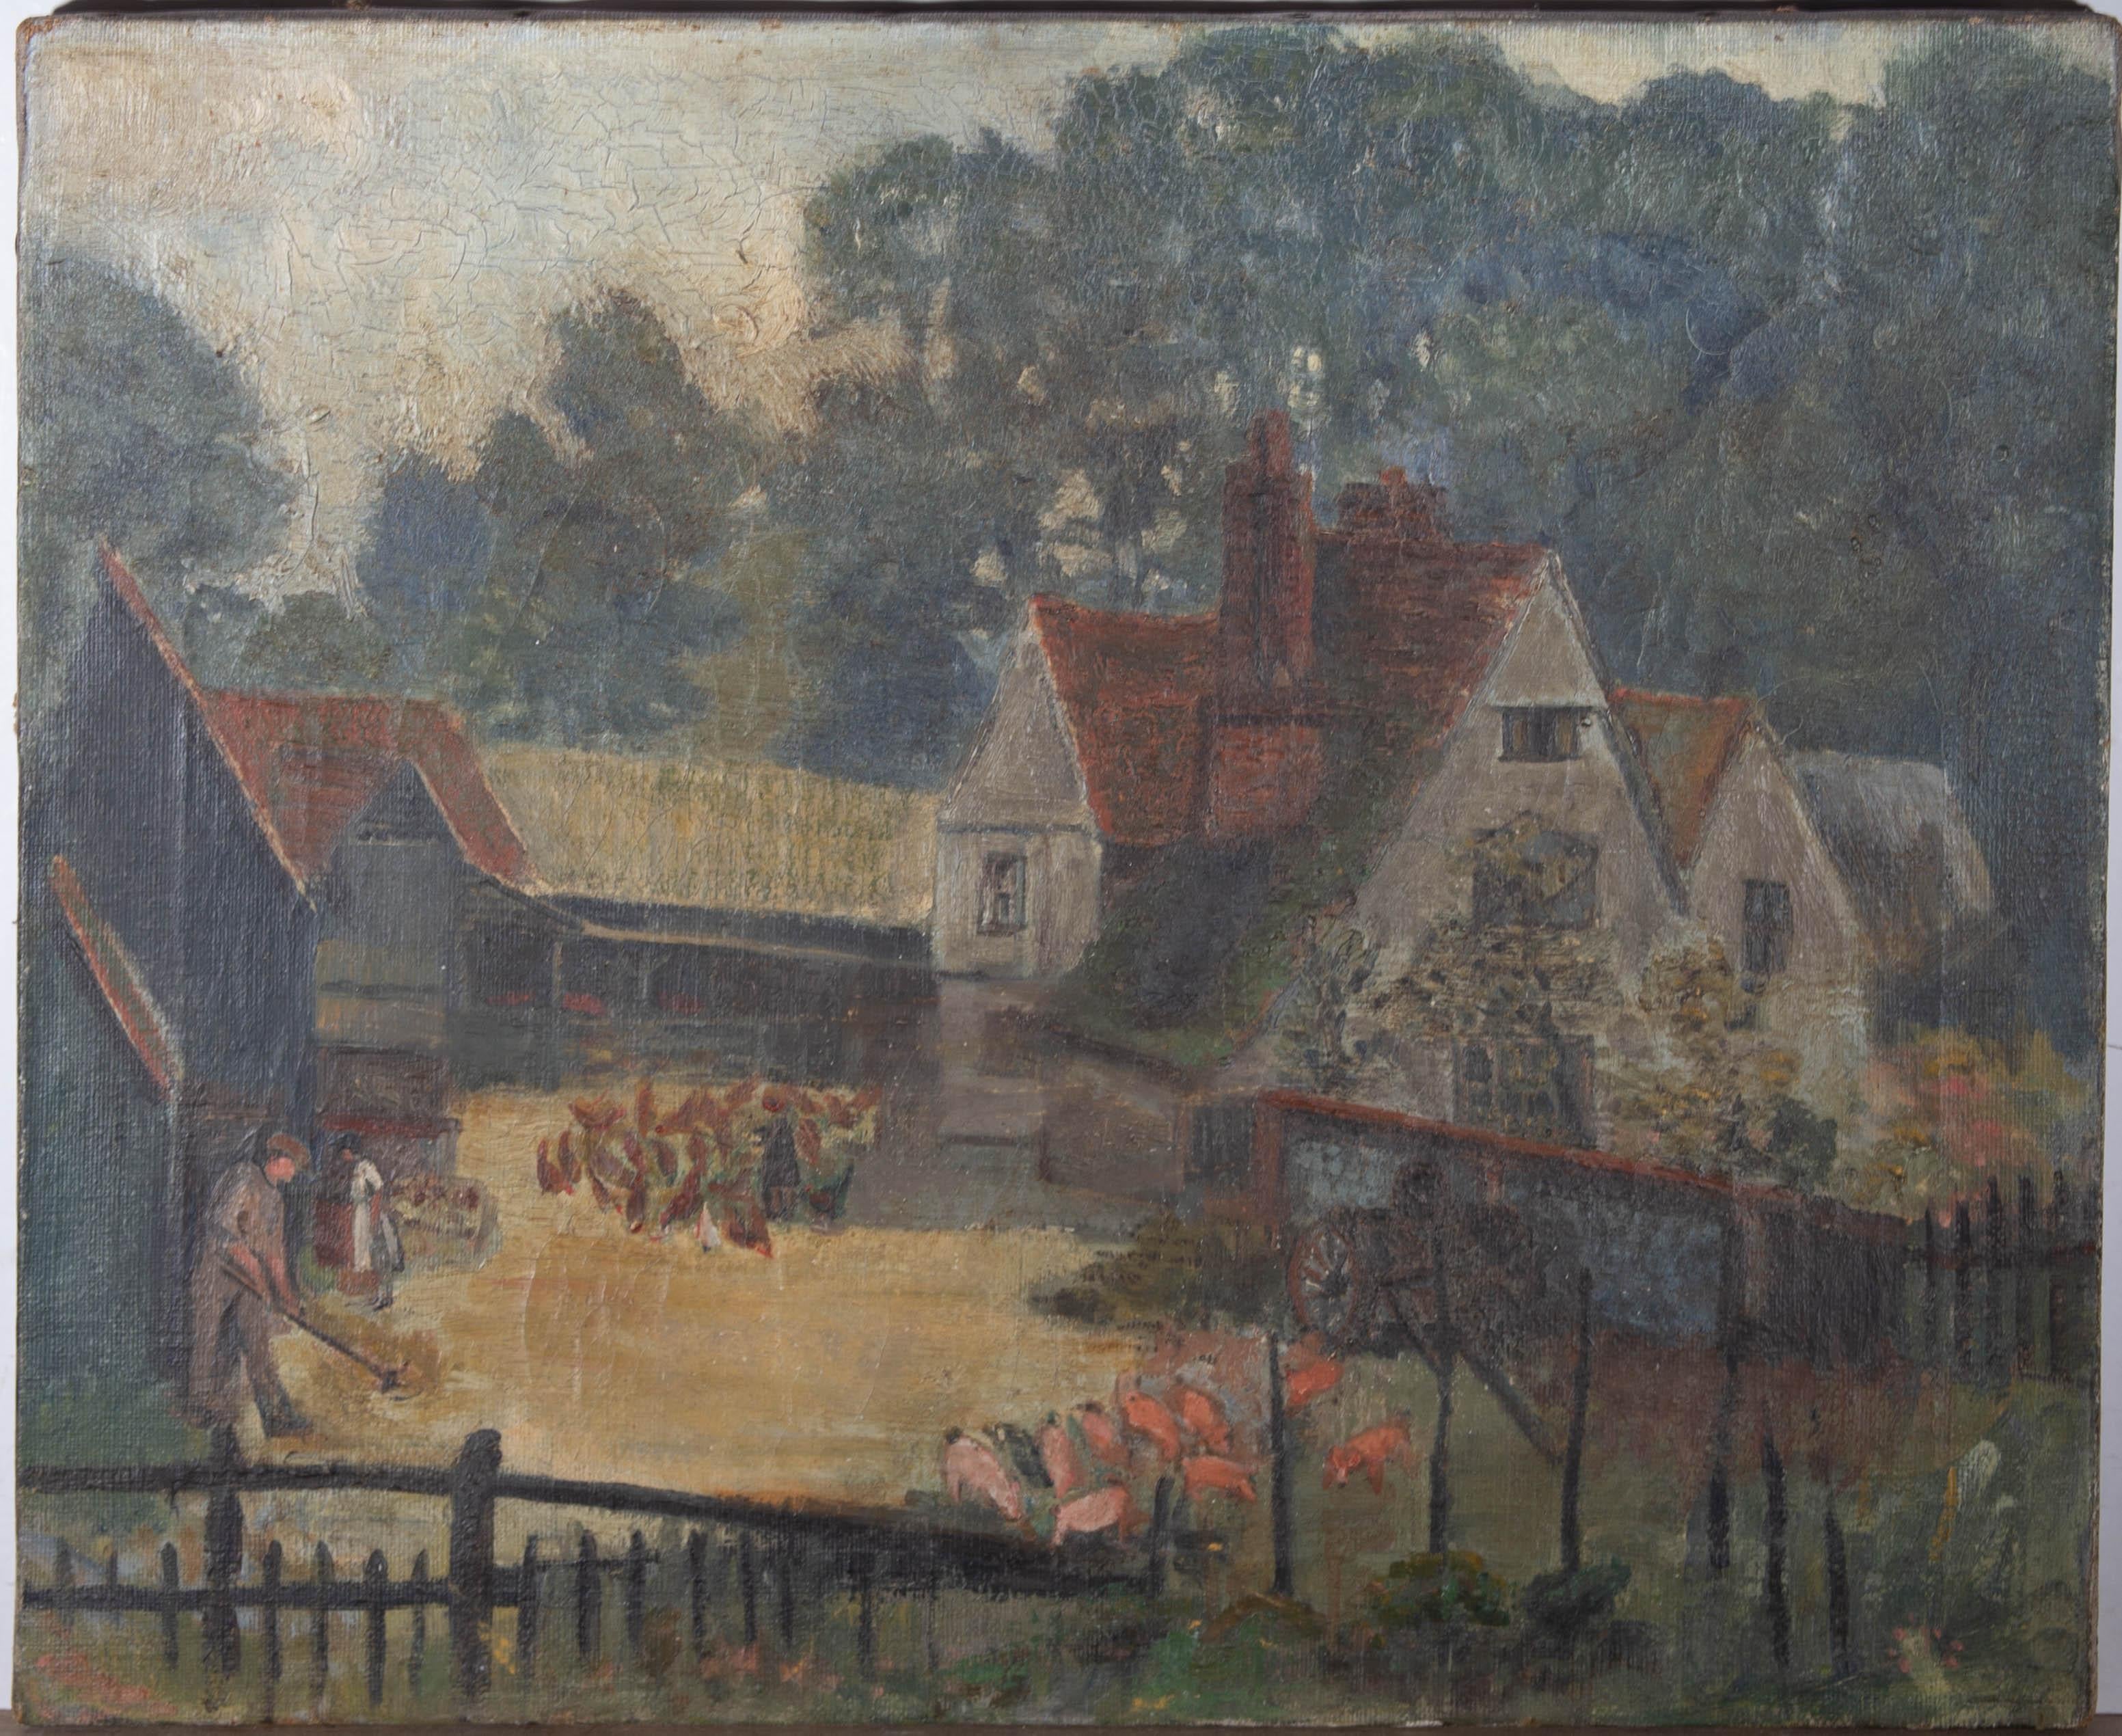 A charmingly rustic and naive scene in oil showing bucolic farm life. A farmer can be seen sweeping the farm yard as his wife busies herself near him. Chickens and pigs feed in the yard next to the farmhouse and barns. On canvas.
